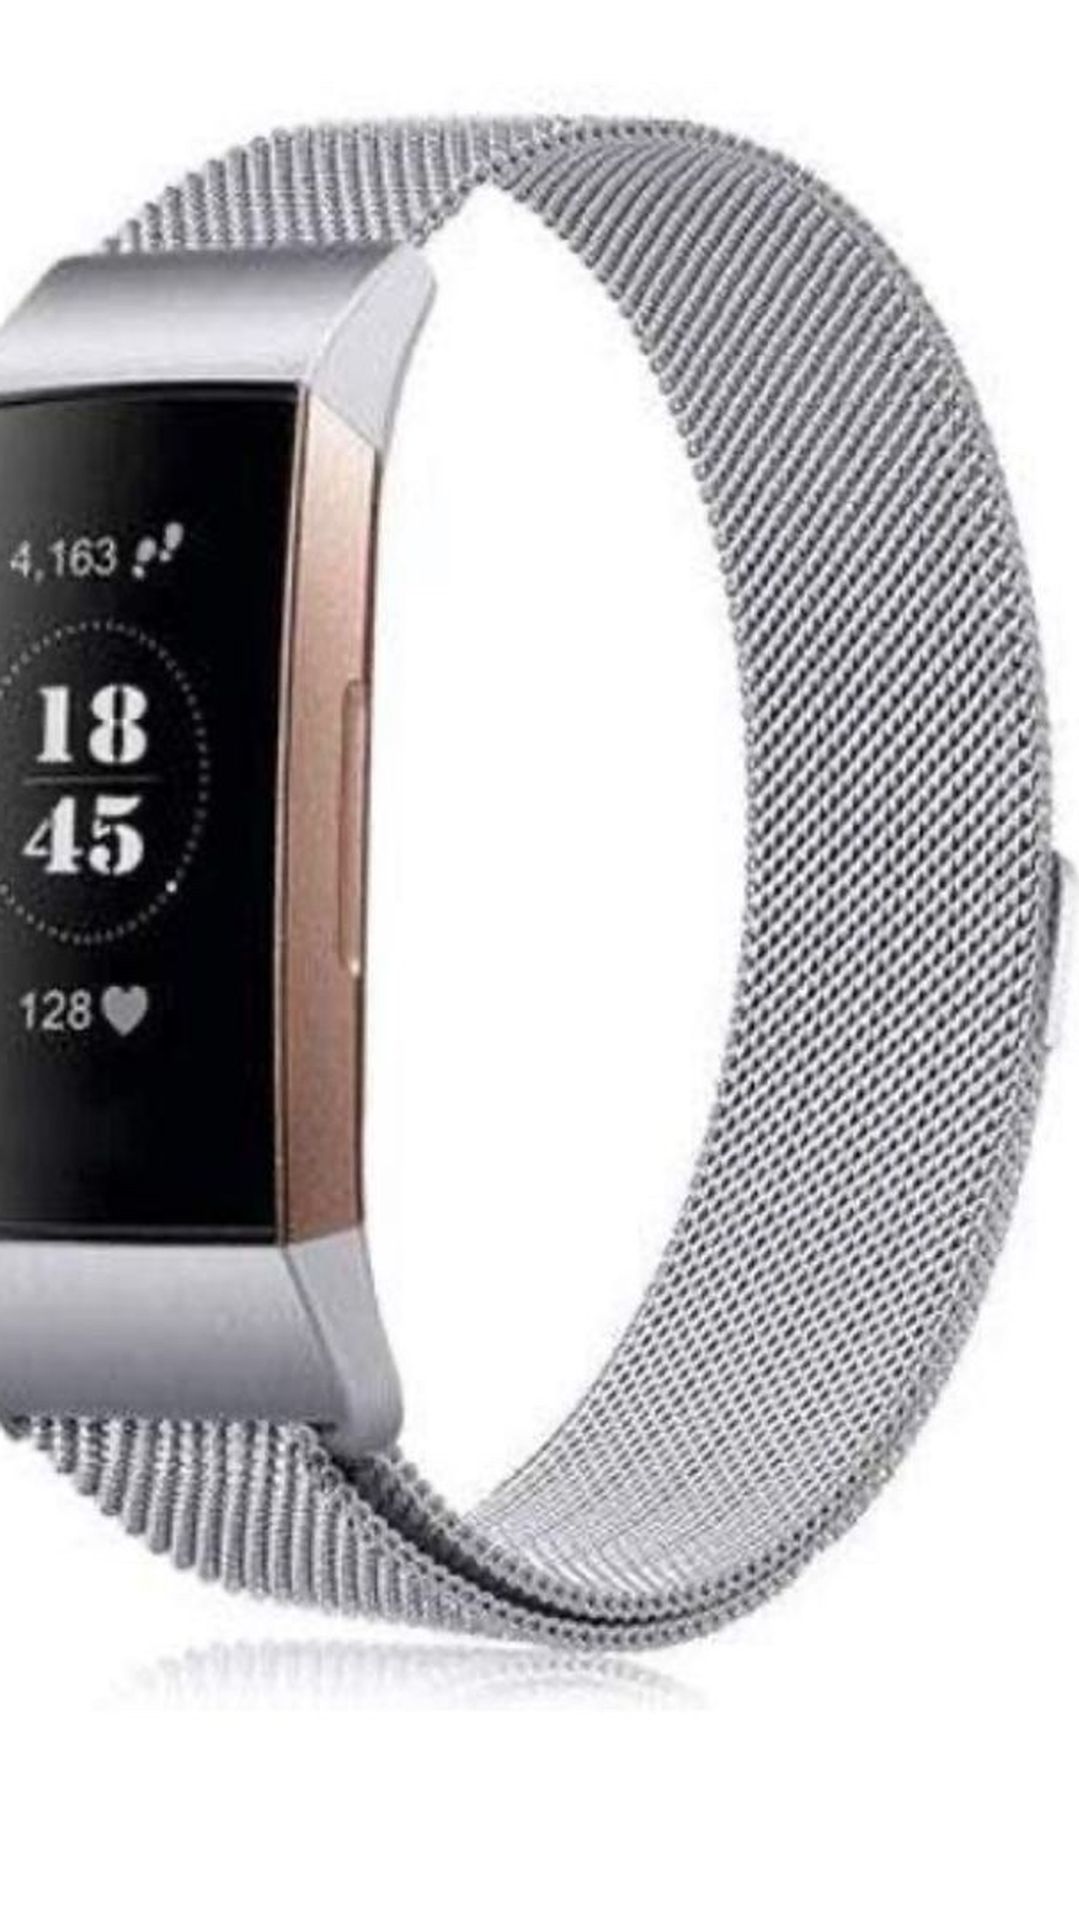 Fitbit charge 2 w stainless steel band & white rubber band